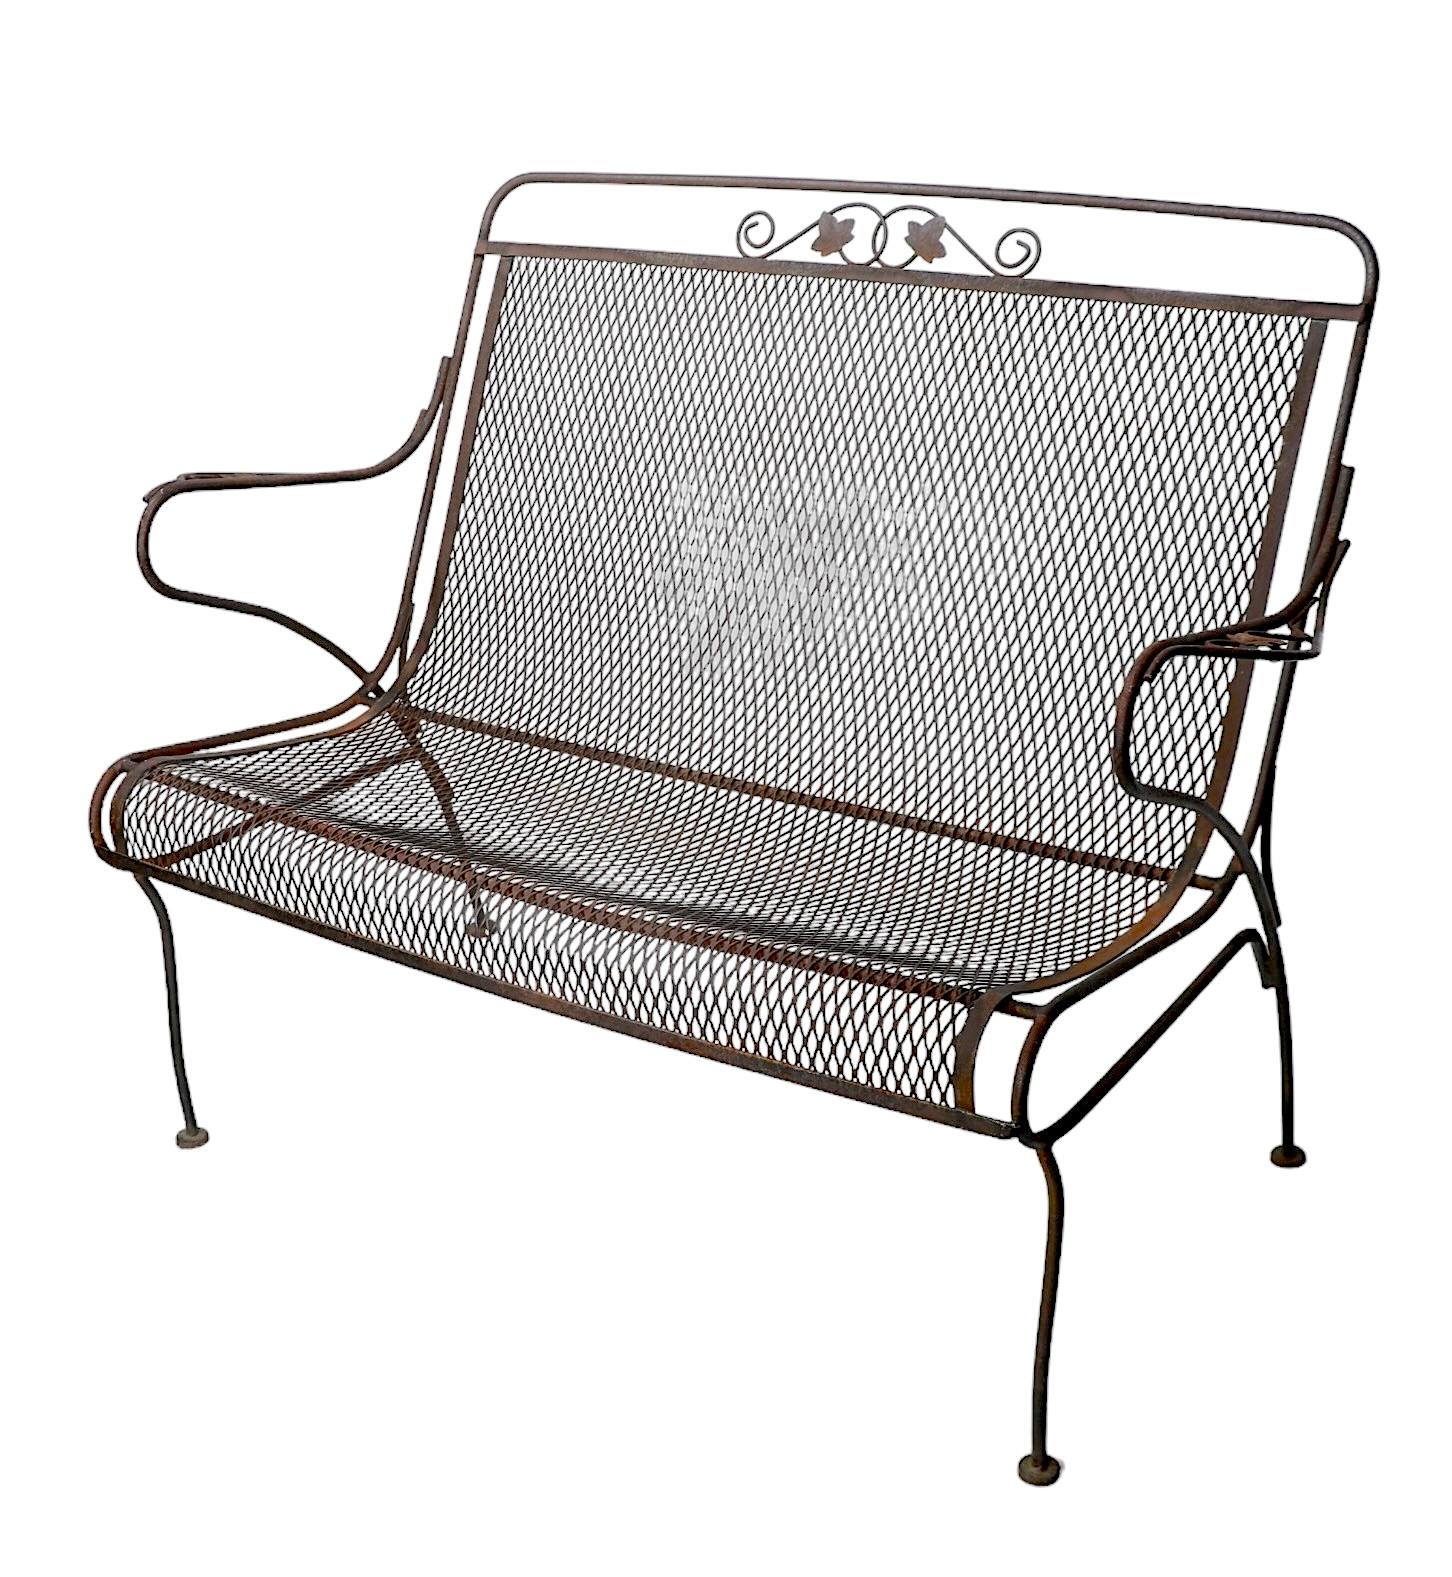 Classic vintage garden, patio, poolside, bench, attributed to Salterini, or possibly Woodard. The loveseat features a wrought iron frame with a continuous seat and backrest made of metal mesh. This example is structurally sound and sturdy, showing